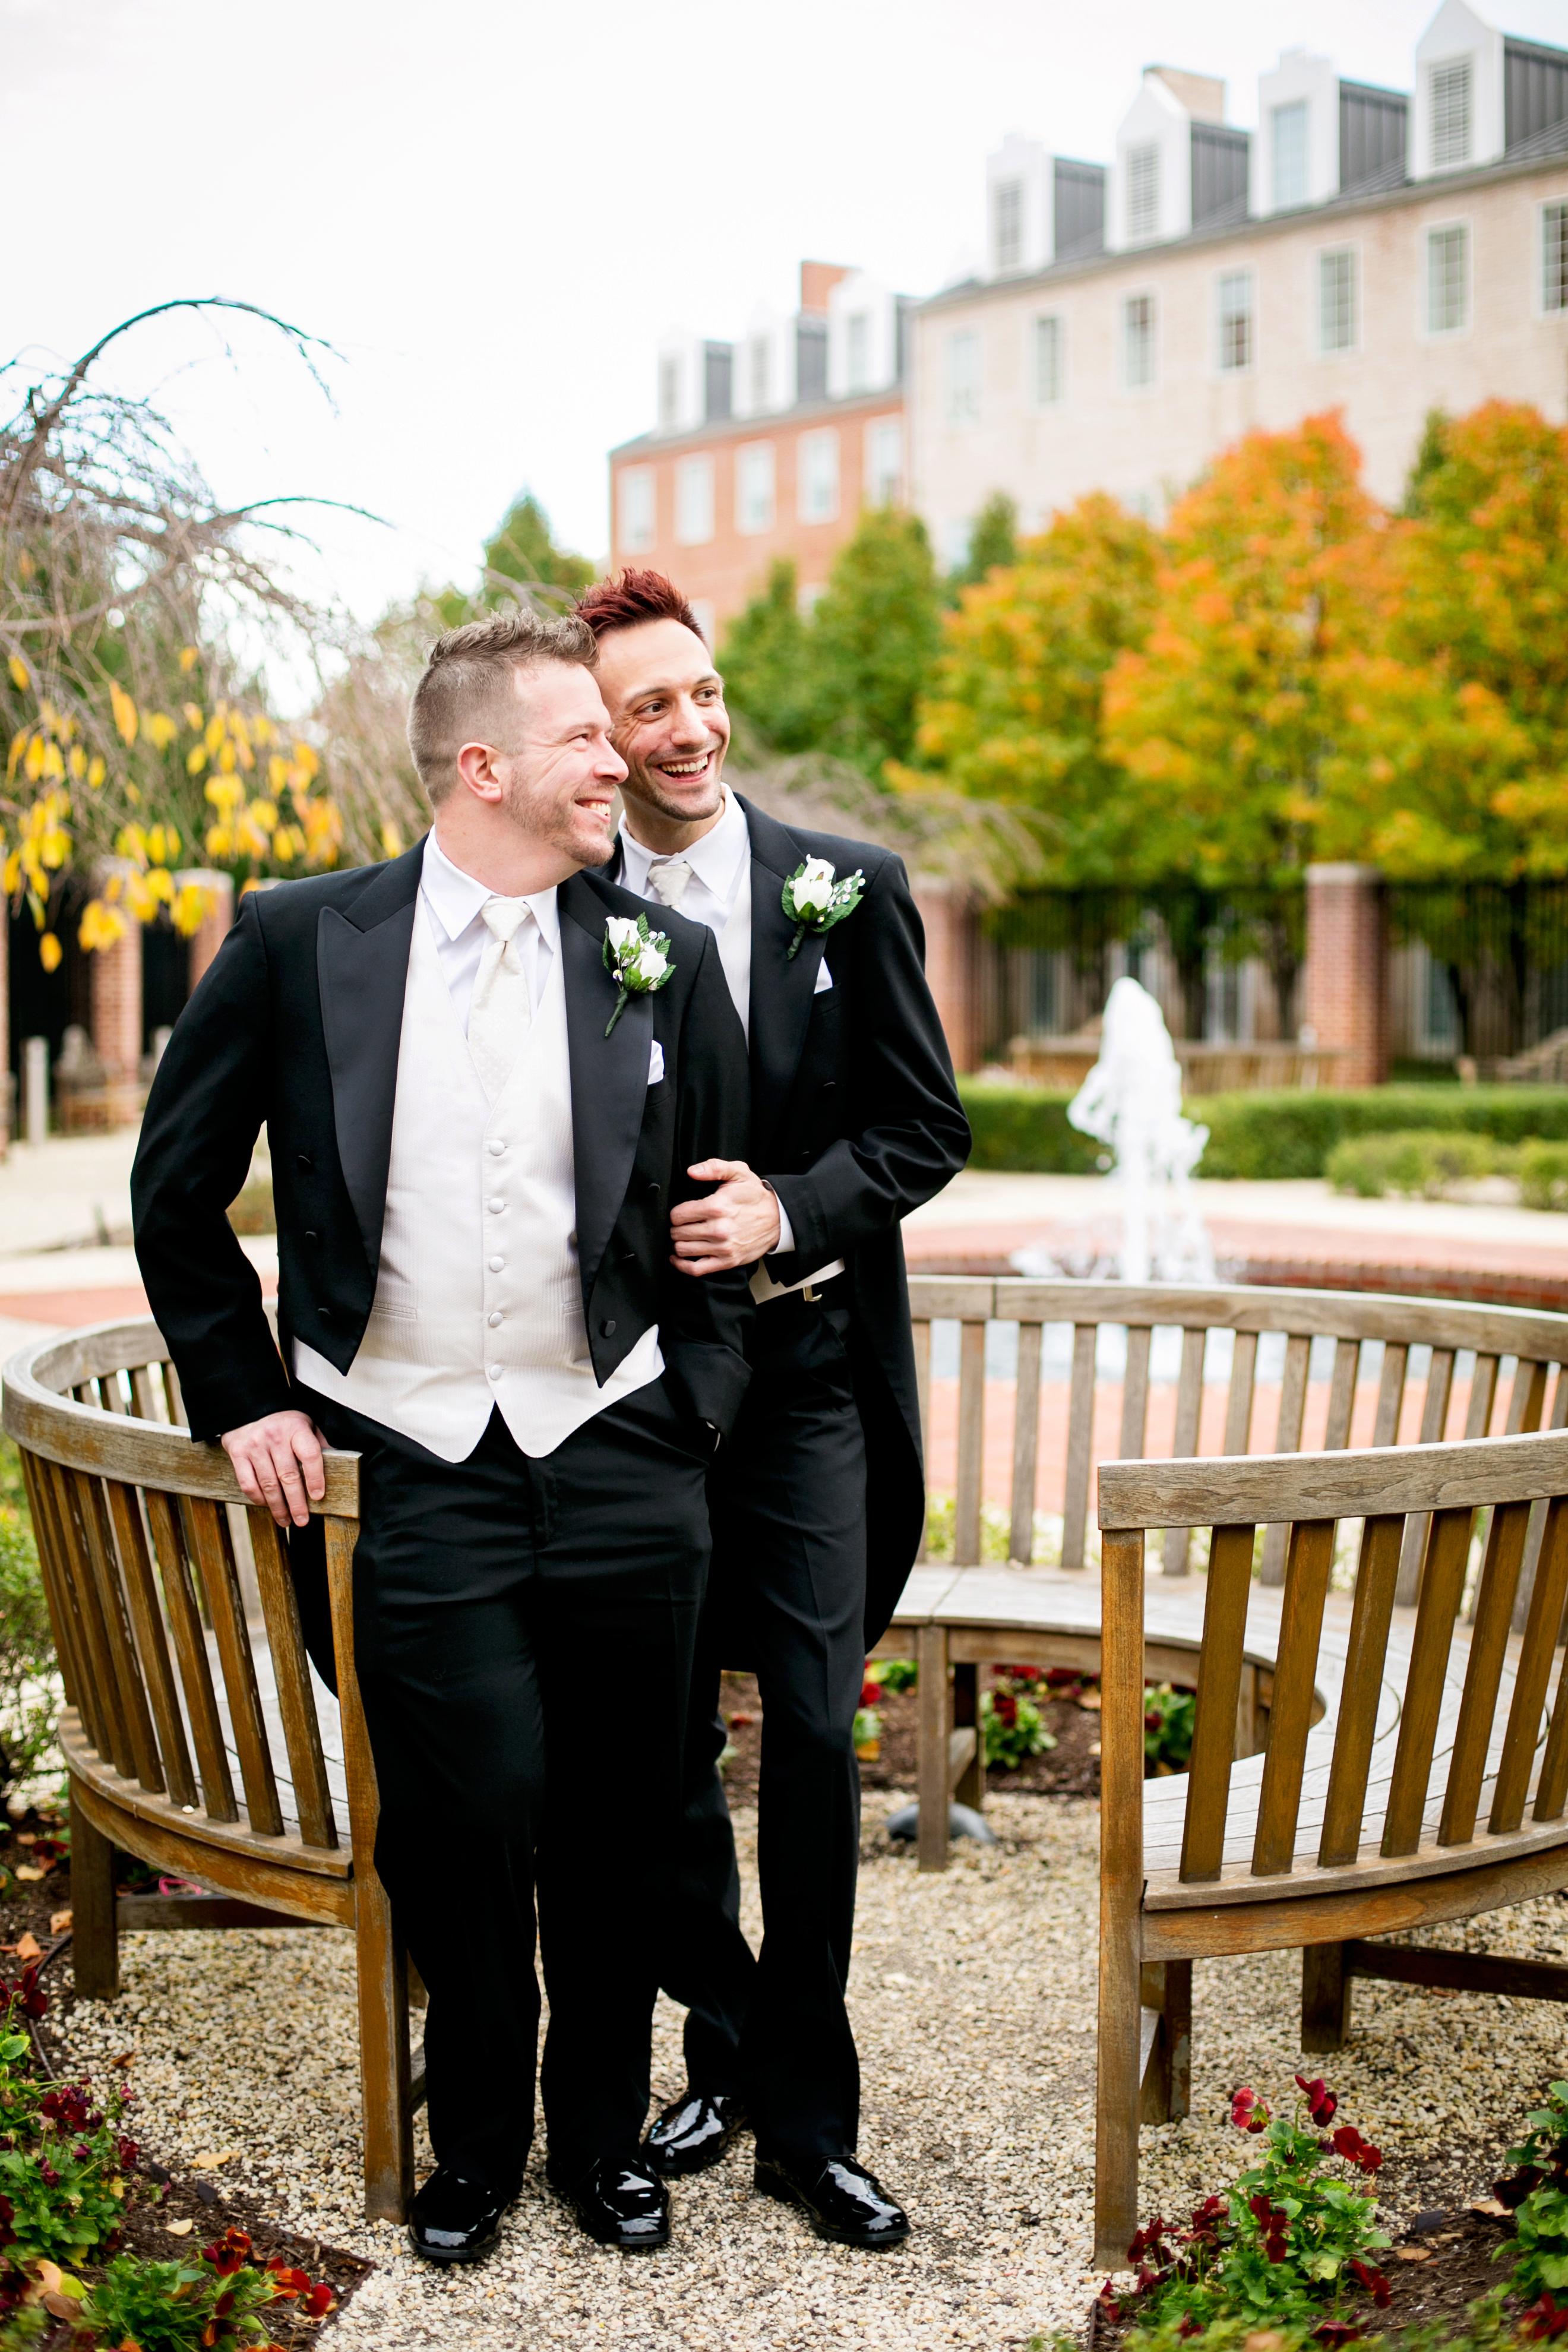 Groom and Groom in front of bench with fountain behind in garden